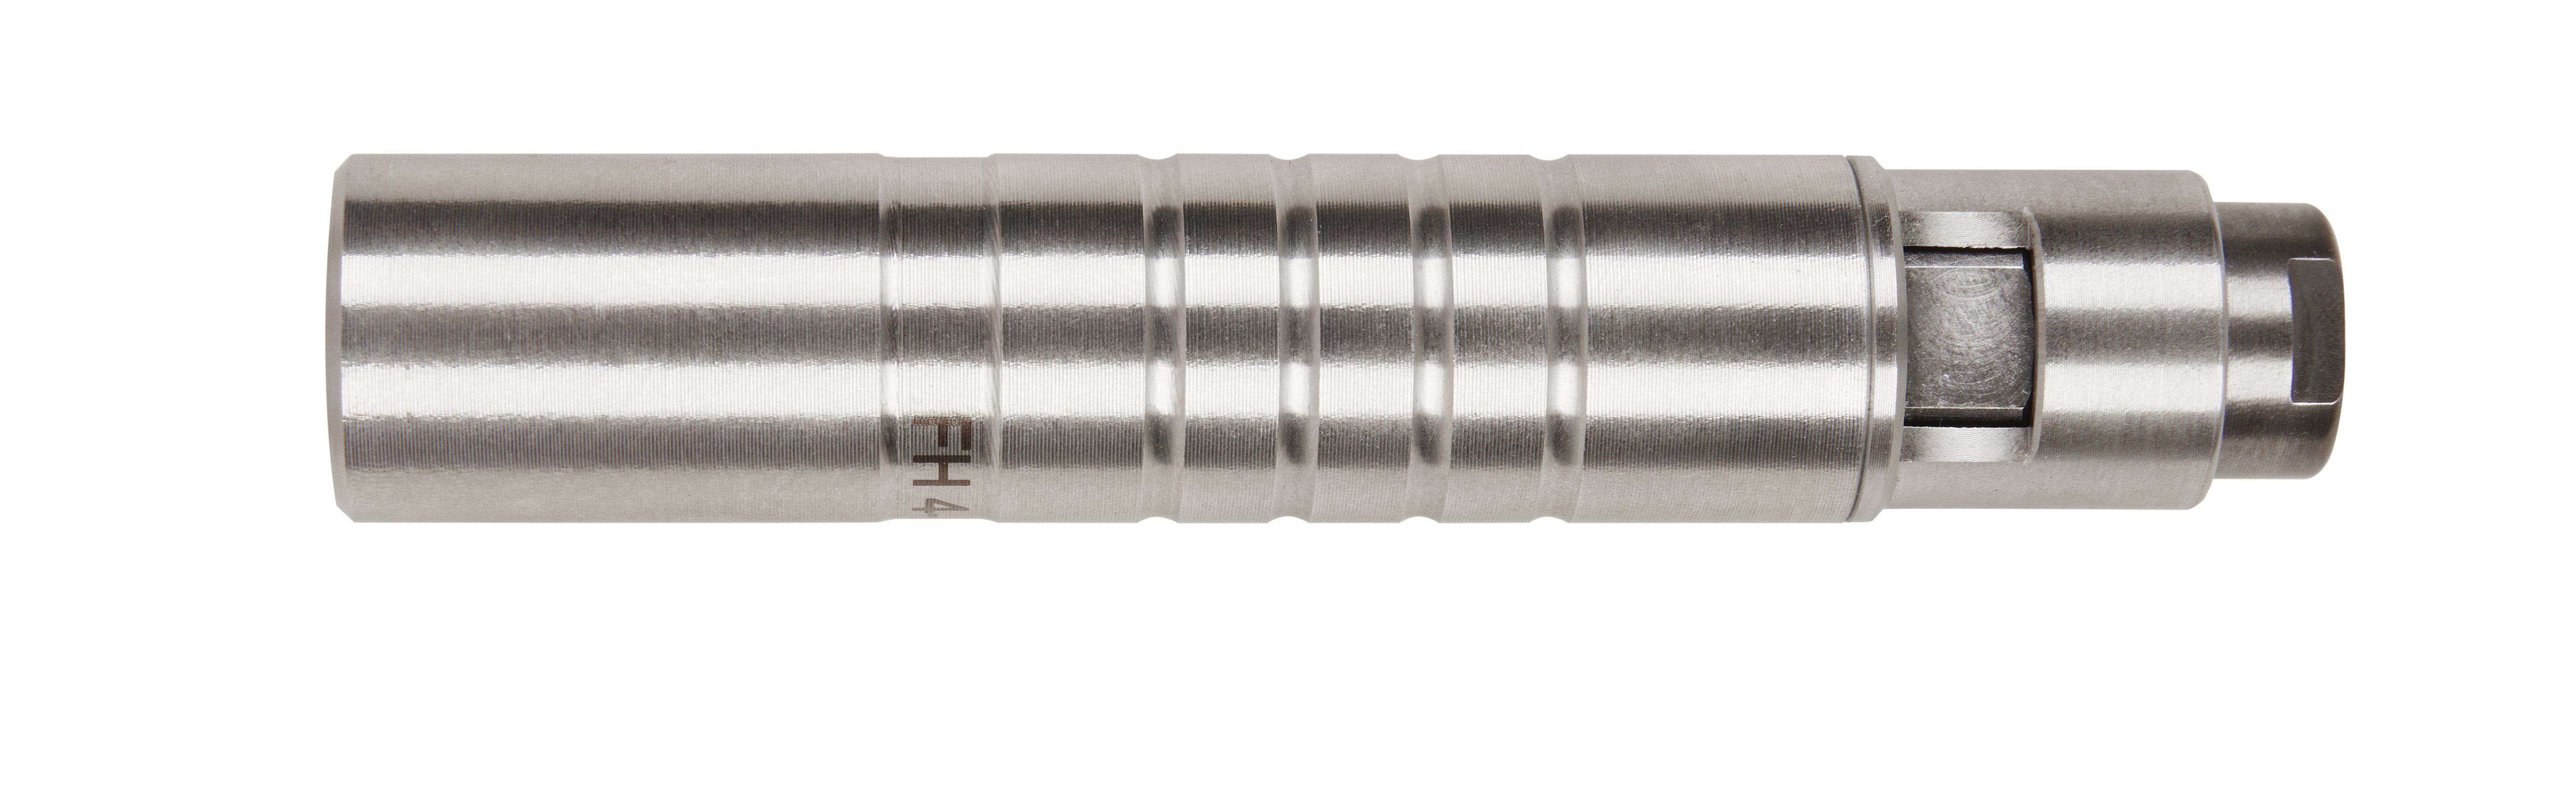 Suhner FH 4 Straight Toolholder, Inox / Stainless Steel, G 16 Connection, 0.77" Width, 4